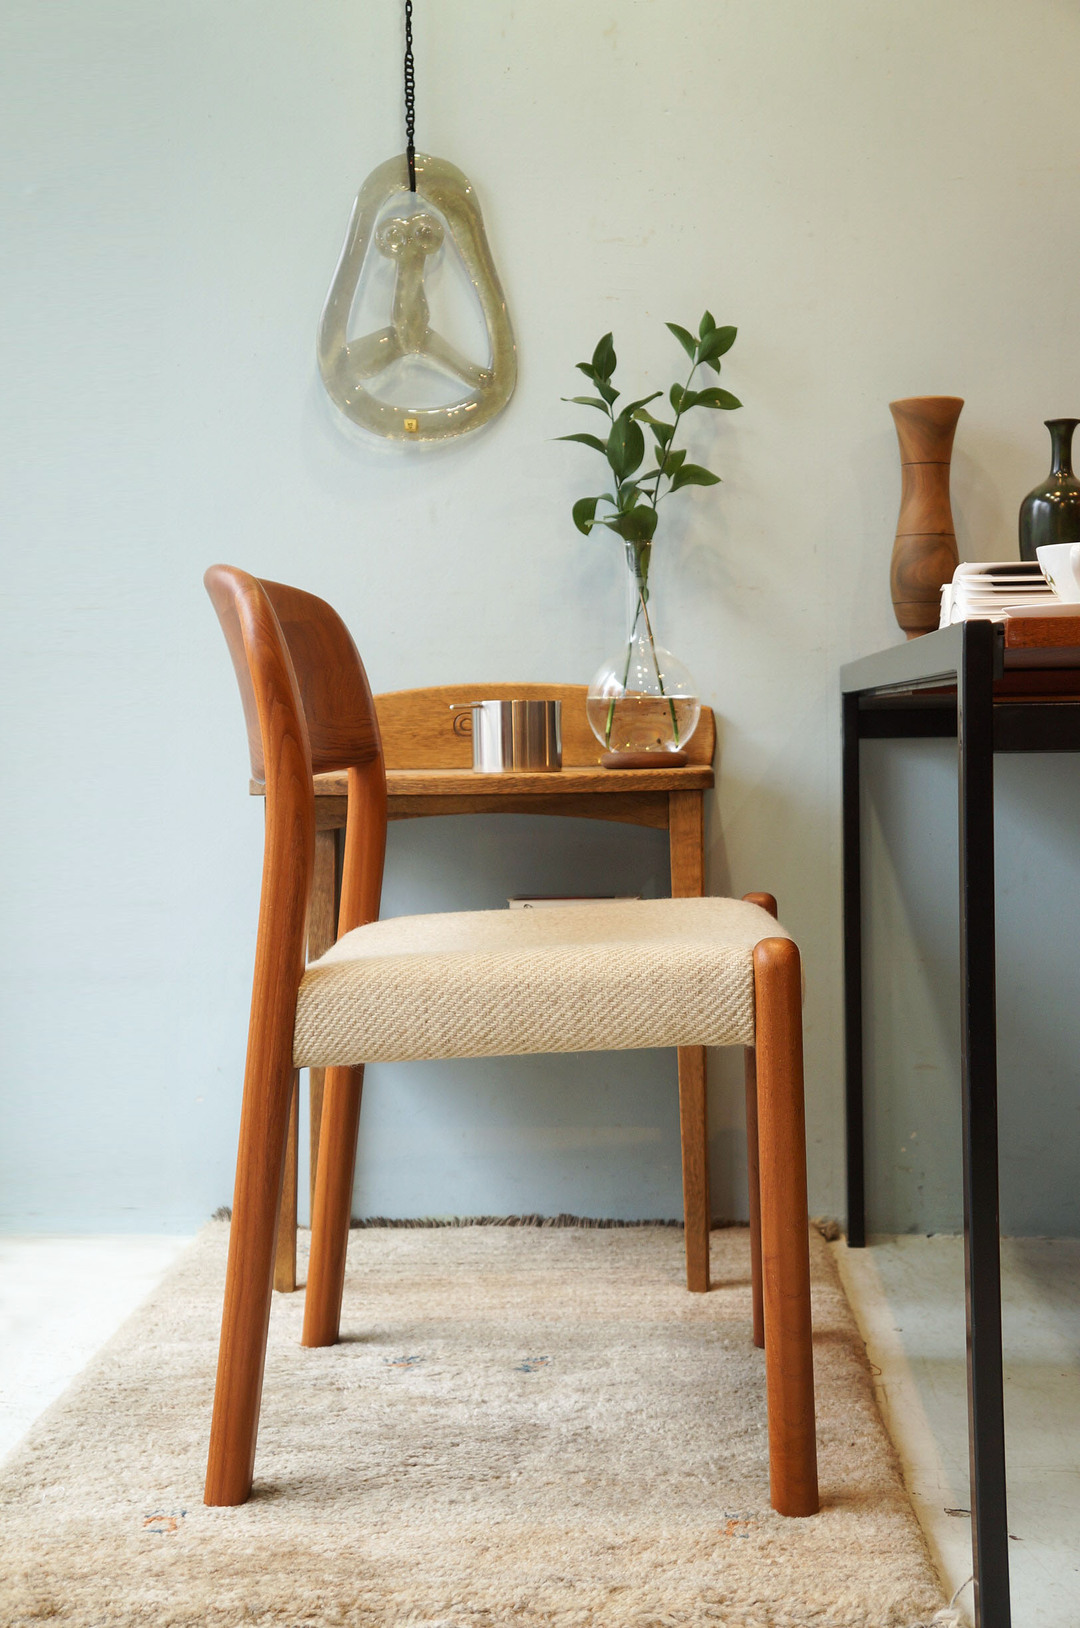 Danish Vintage EMC Furniture Dining Chair/デンマークヴィンテージ ダイニングチェア 椅子 チーク材 北欧モダン